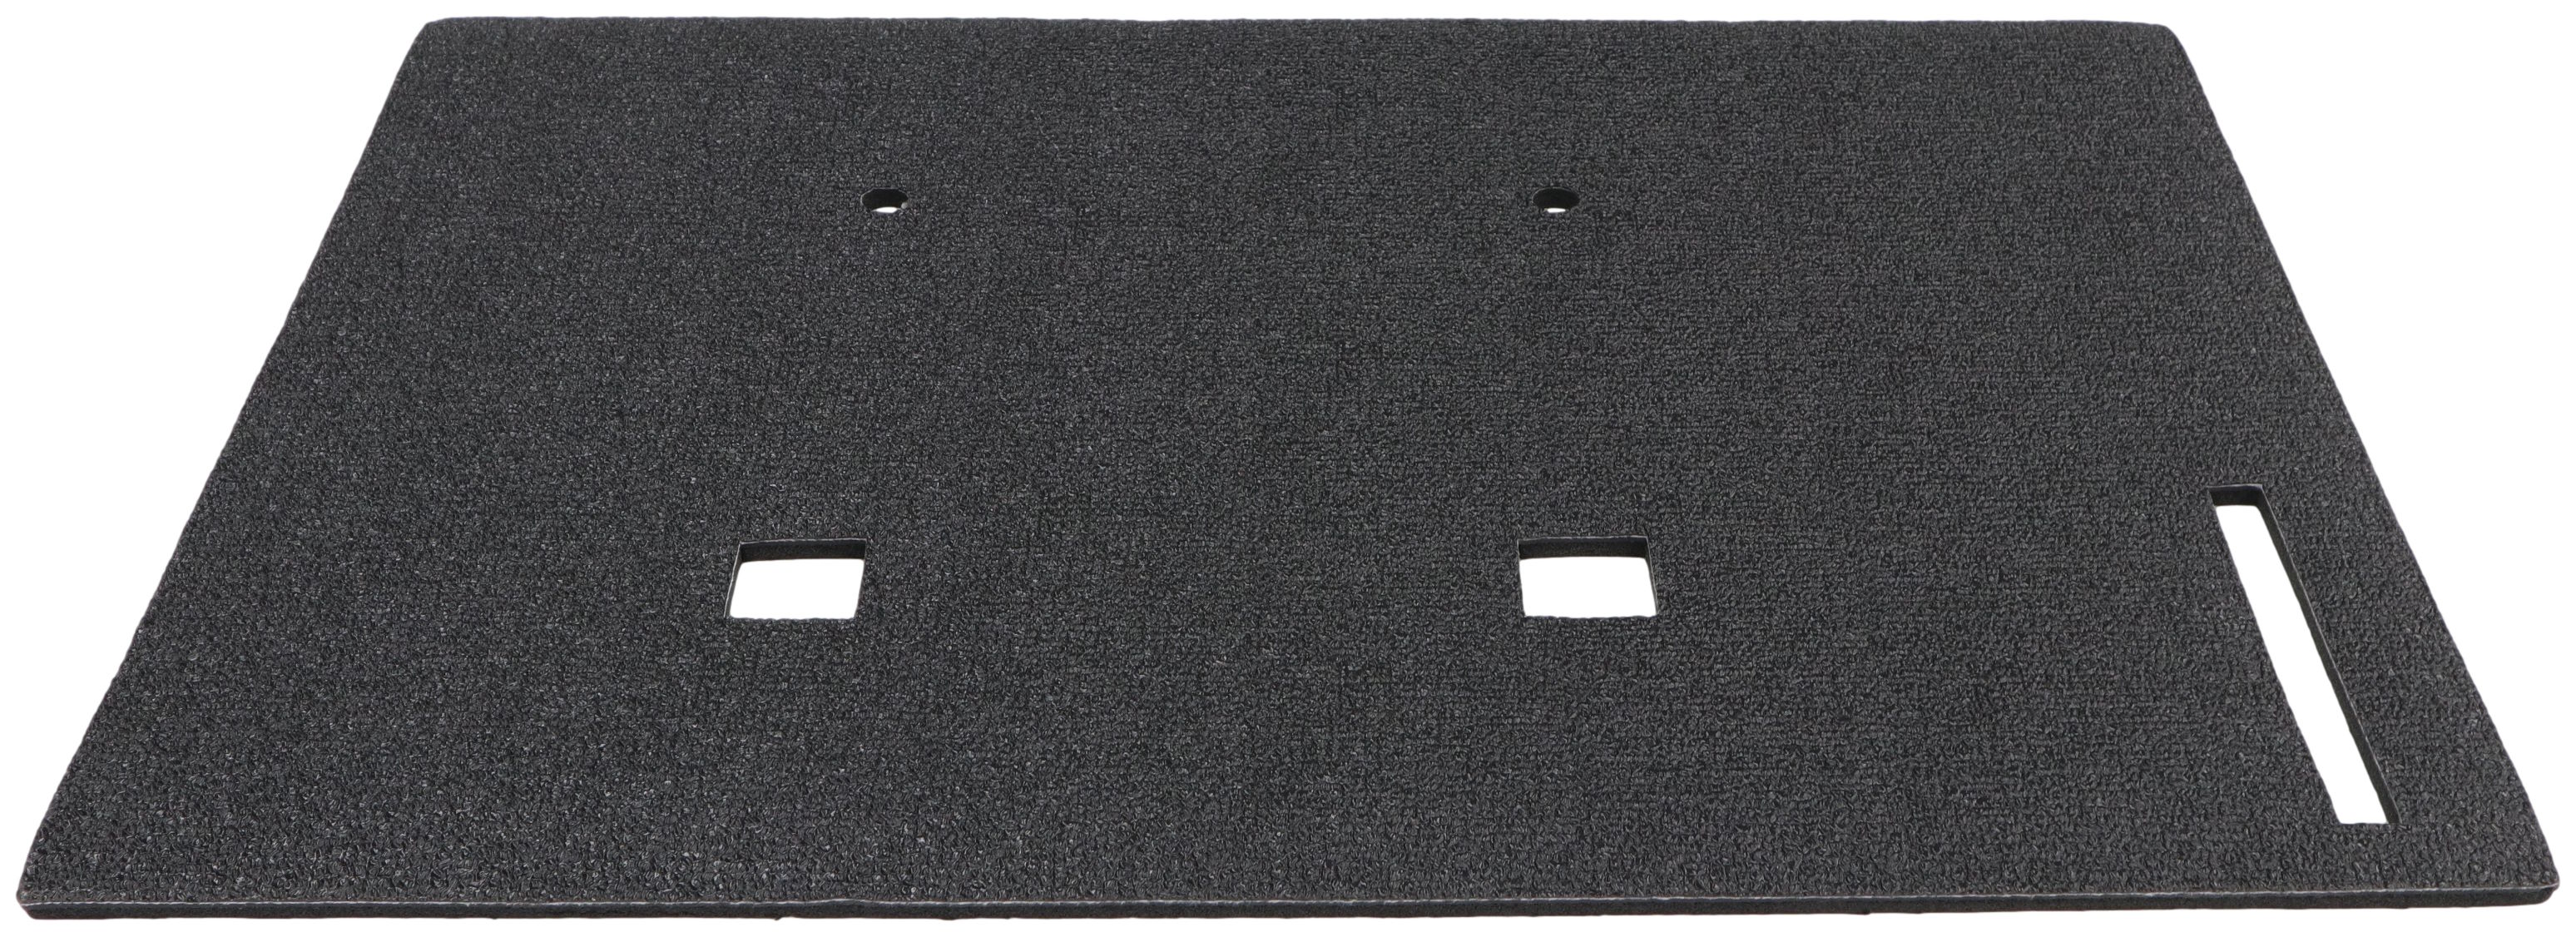 IH 3088-7488 SERIES UNDER SEAT FLOOR MAT (BLACK) Questions & Answers